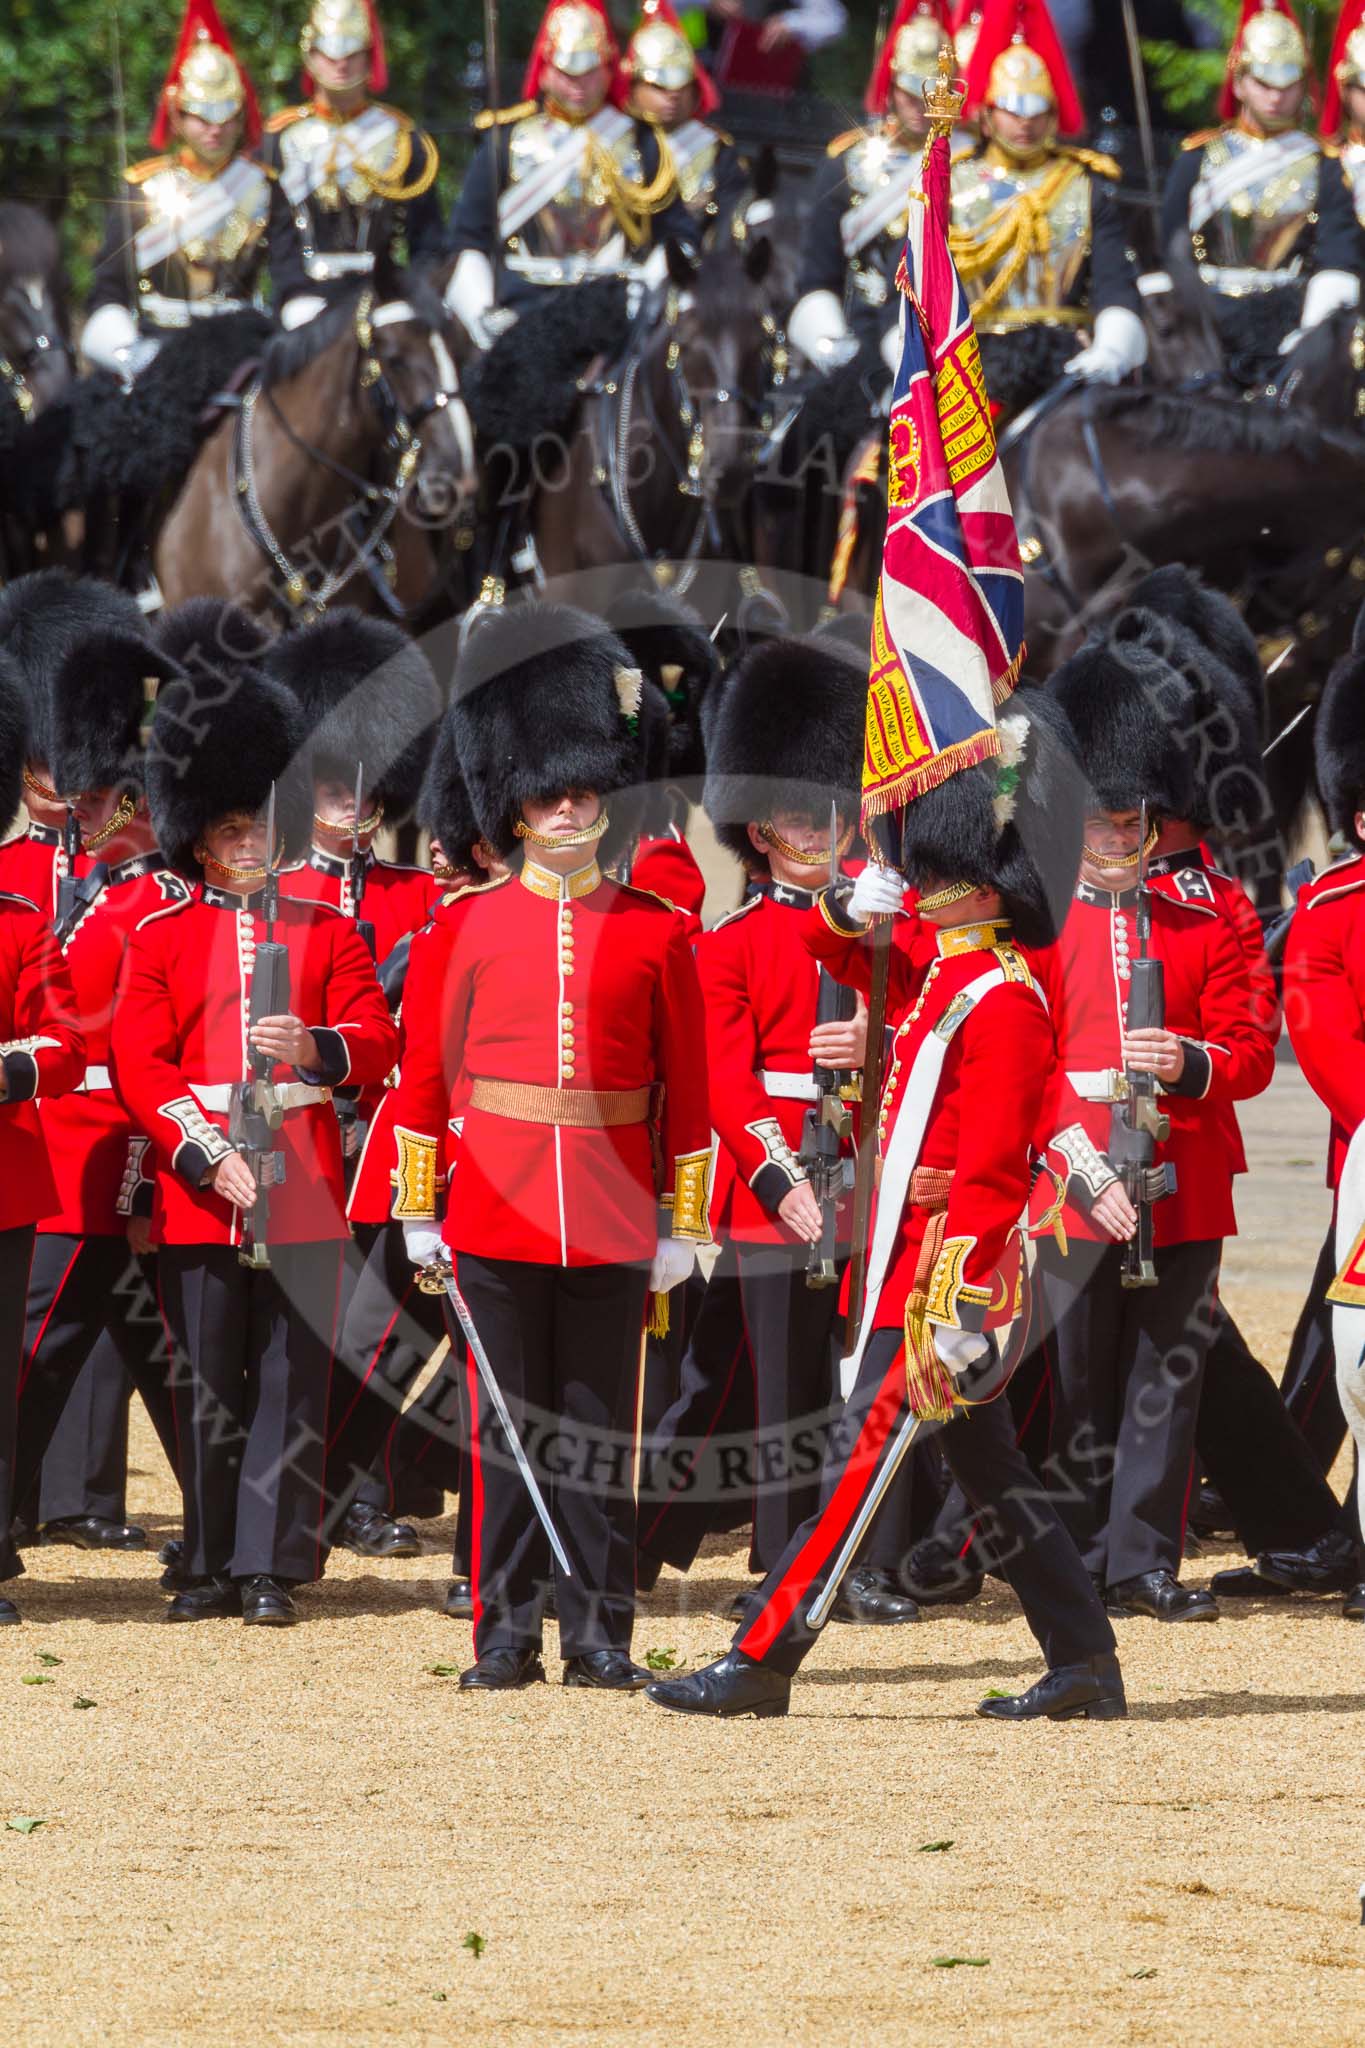 The Colonel's Review 2015.
Horse Guards Parade, Westminster,
London,

United Kingdom,
on 06 June 2015 at 11:25, image #335